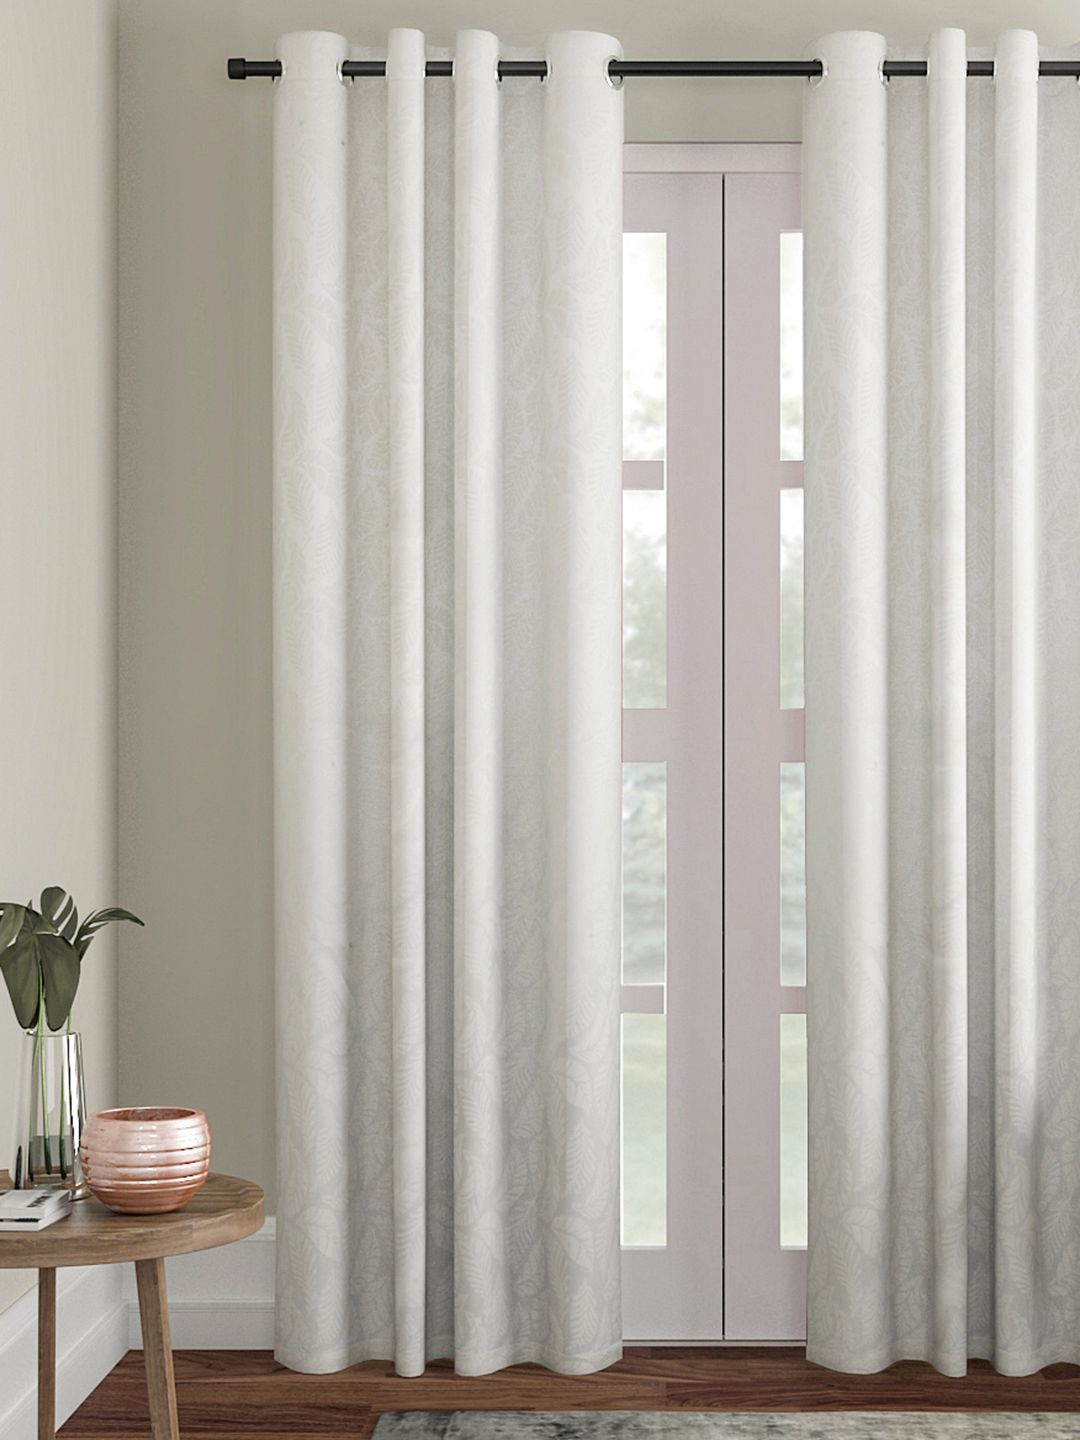 Soumya White Set of Single Long Door Curtains Price in India